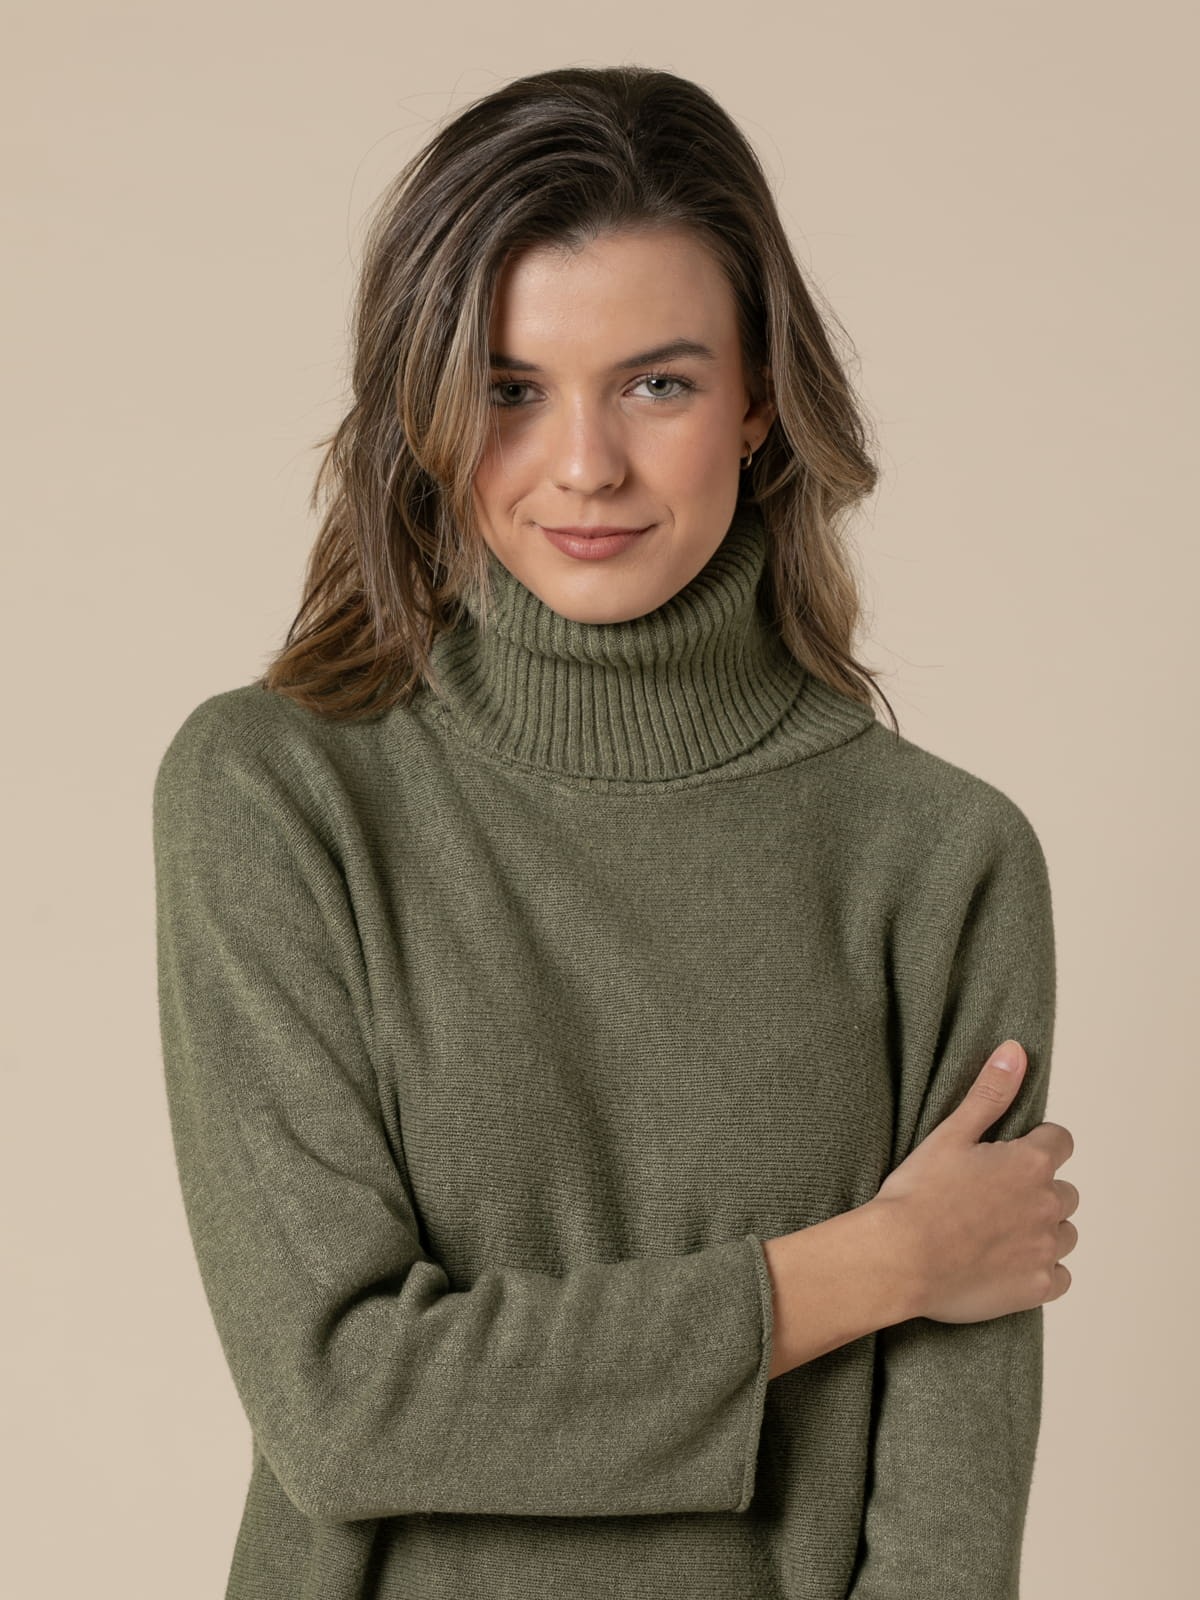 Woman Basic high neck cashmere touch sweater  Green oscurocolour